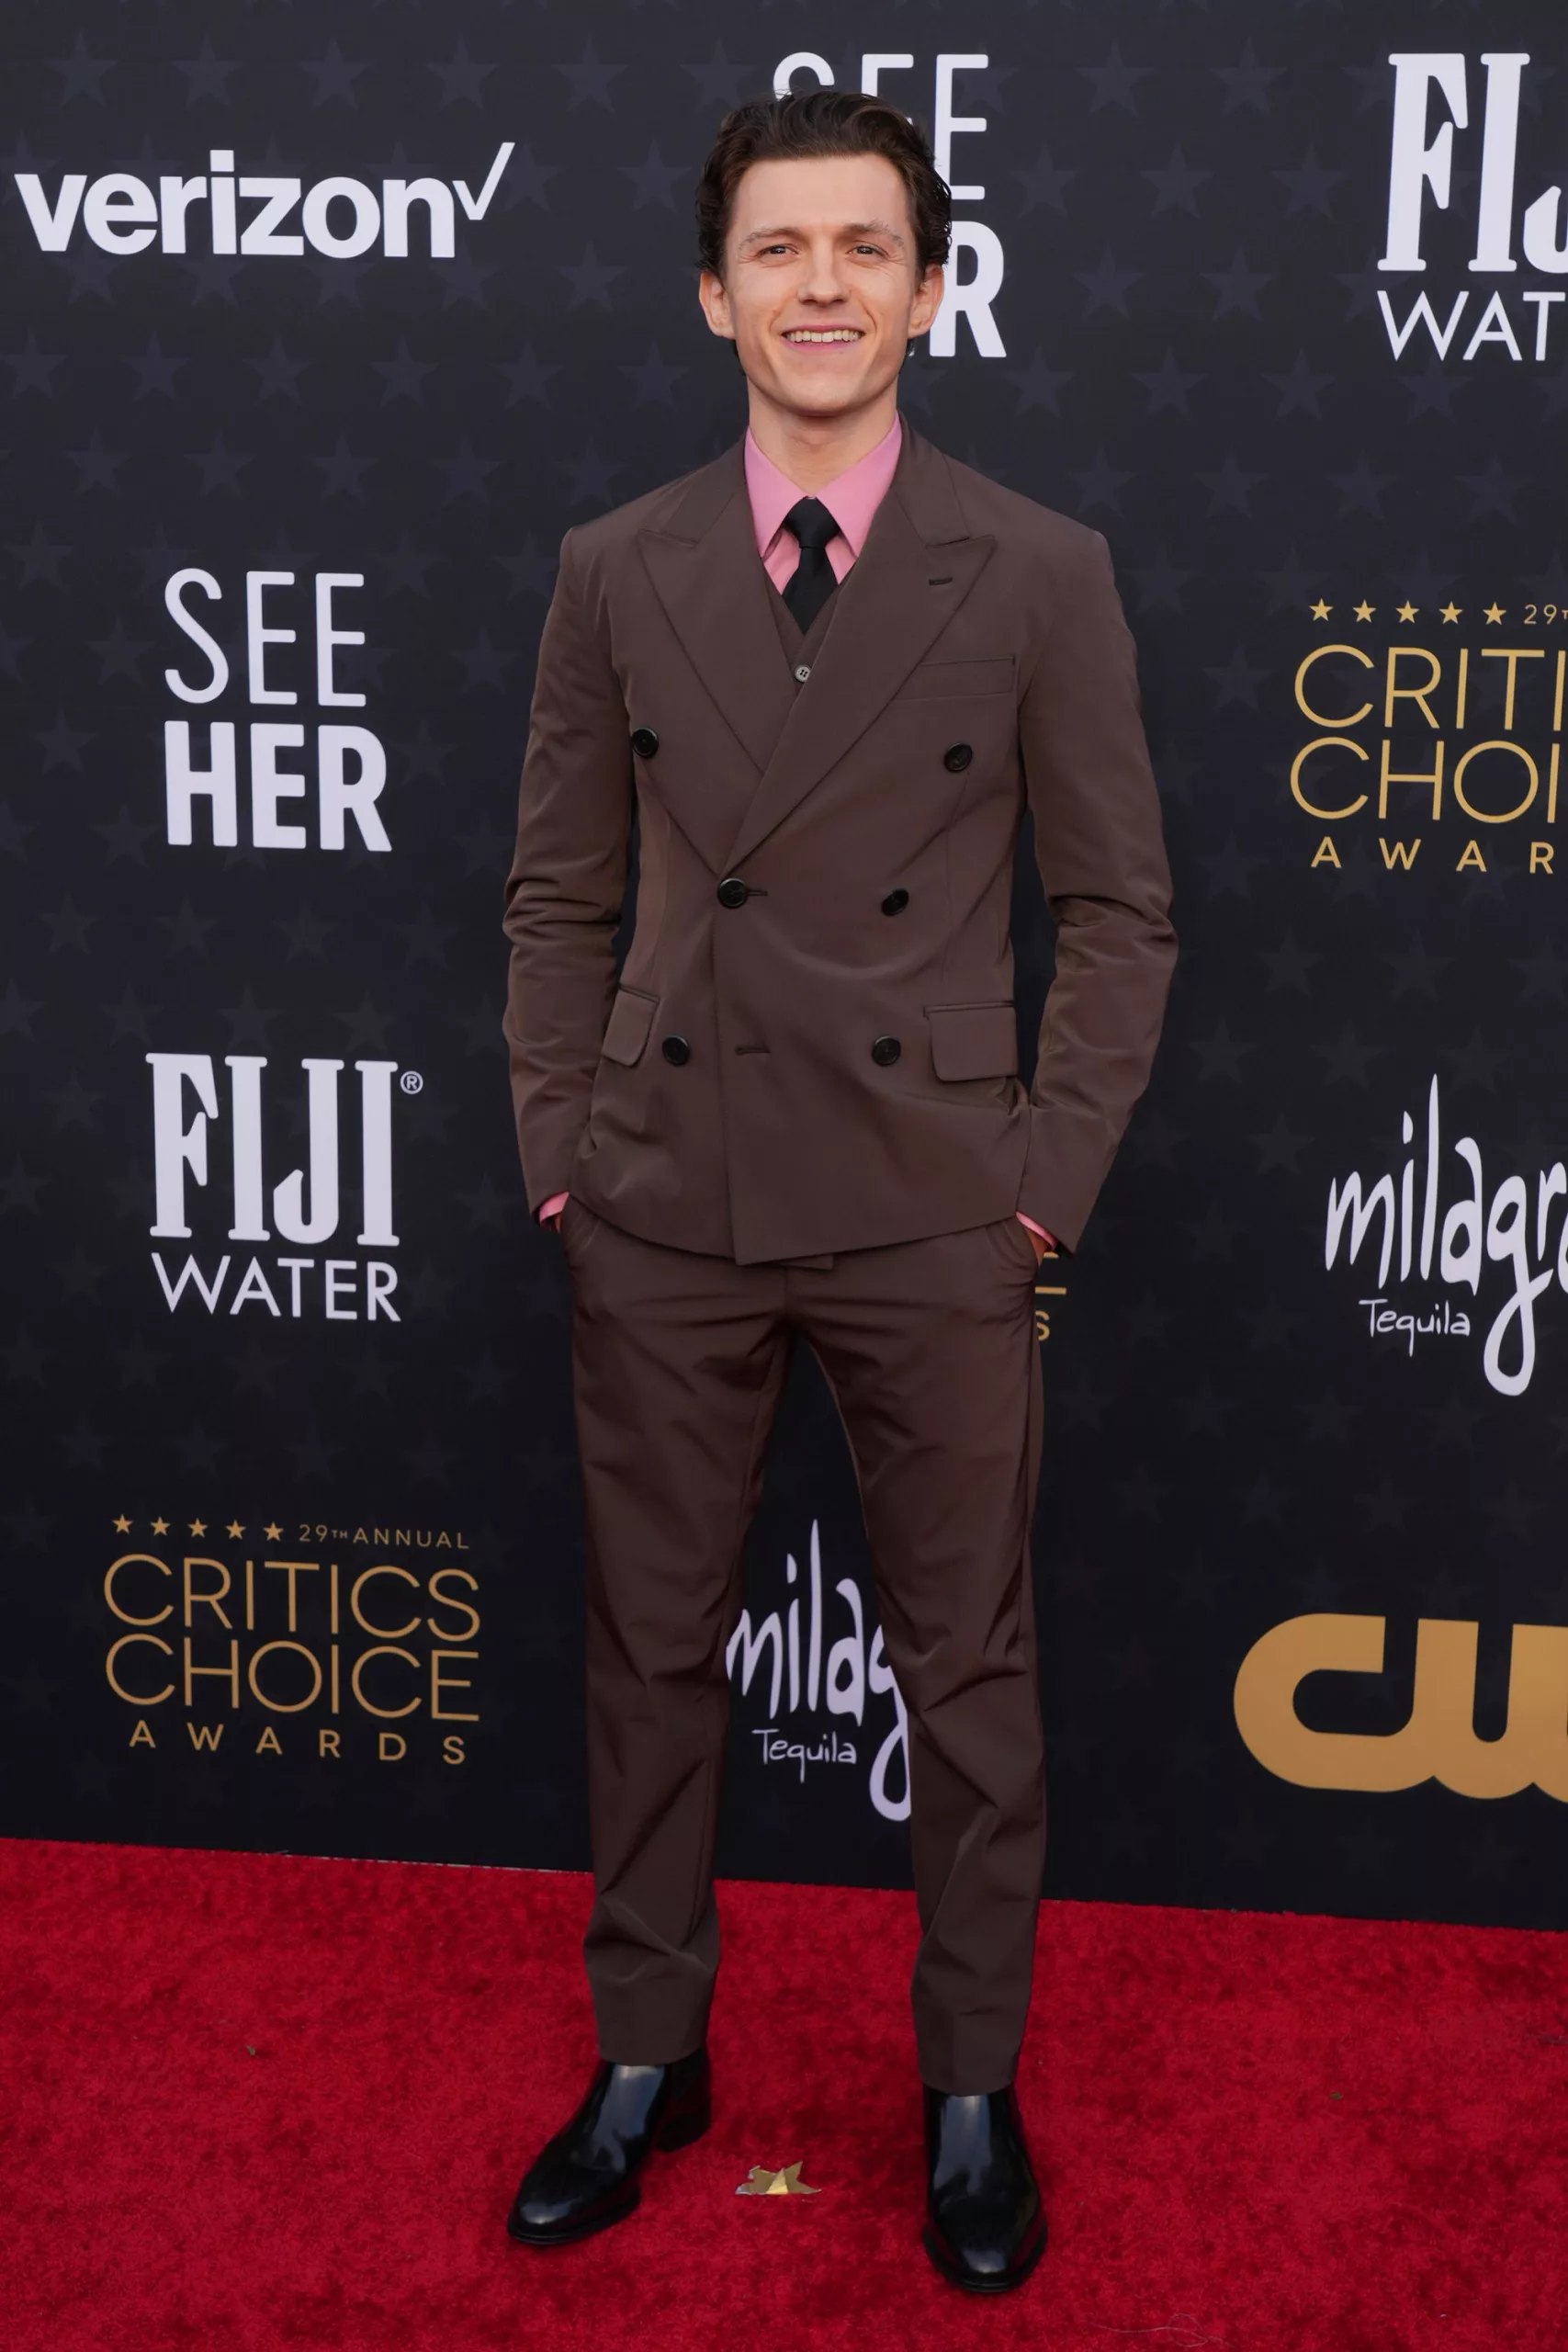 Tom Holland looked dapper in head-to-toe Prada, with a pink poplin shirt adding a pop of color to his all-brown suit.